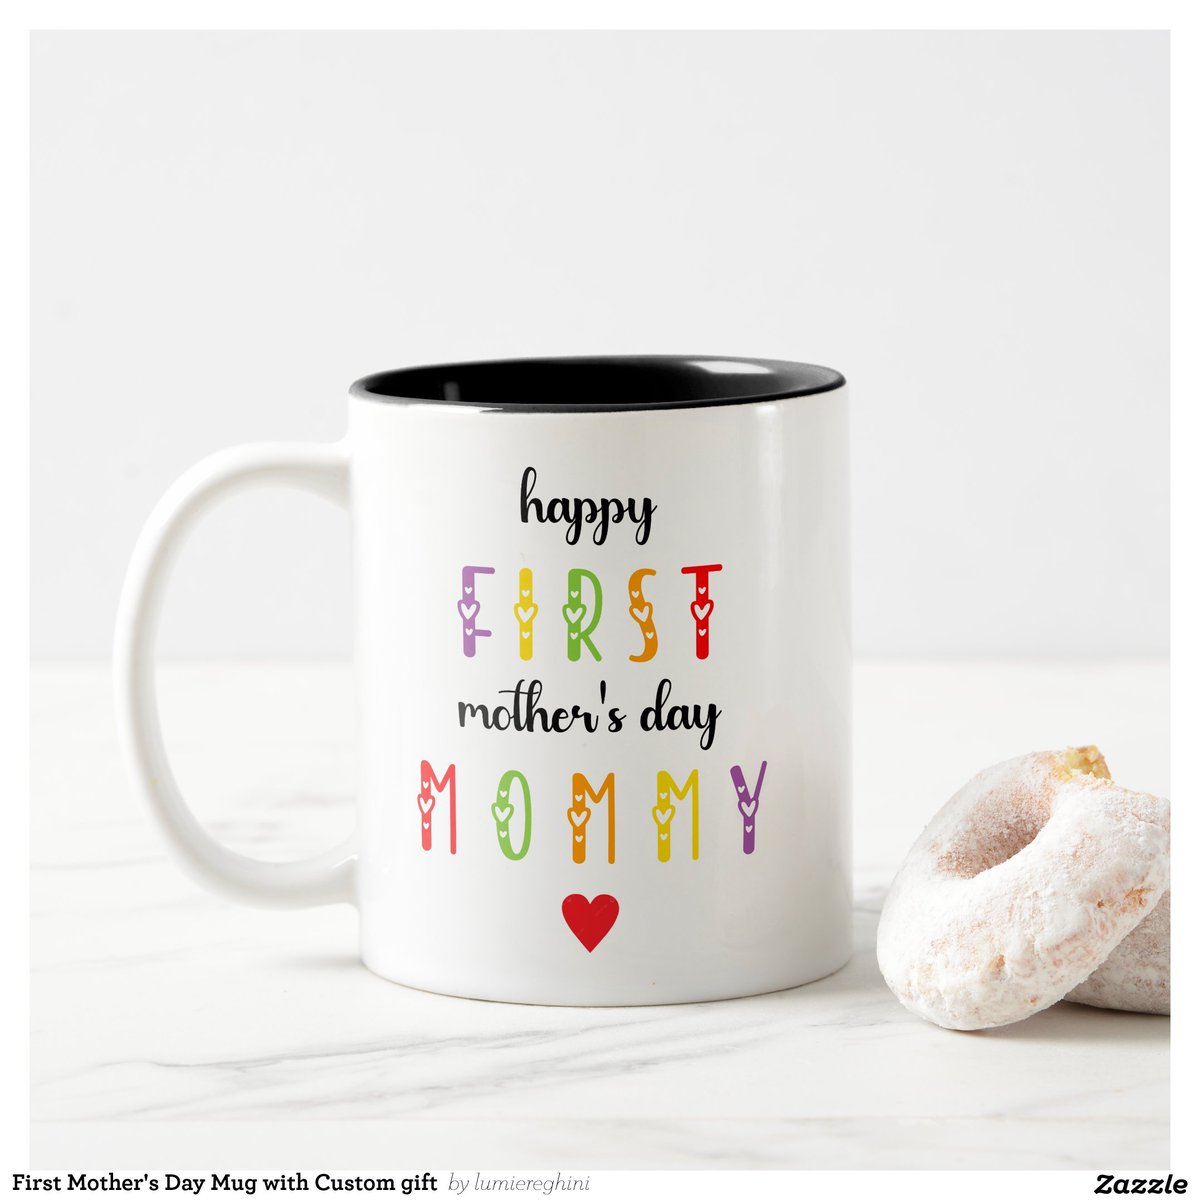 ☕️ Sip in style this Mother's Day! ☕️
🙏🥐
 Customize our heartwarming mug with your own photo and message for Mom. A perfect keepsake she'll treasure forever. Order now! #CustomMug #PersonalizedGift #HeartfeltMotherDay

zazzle.com/z/al094c7u?rf=…